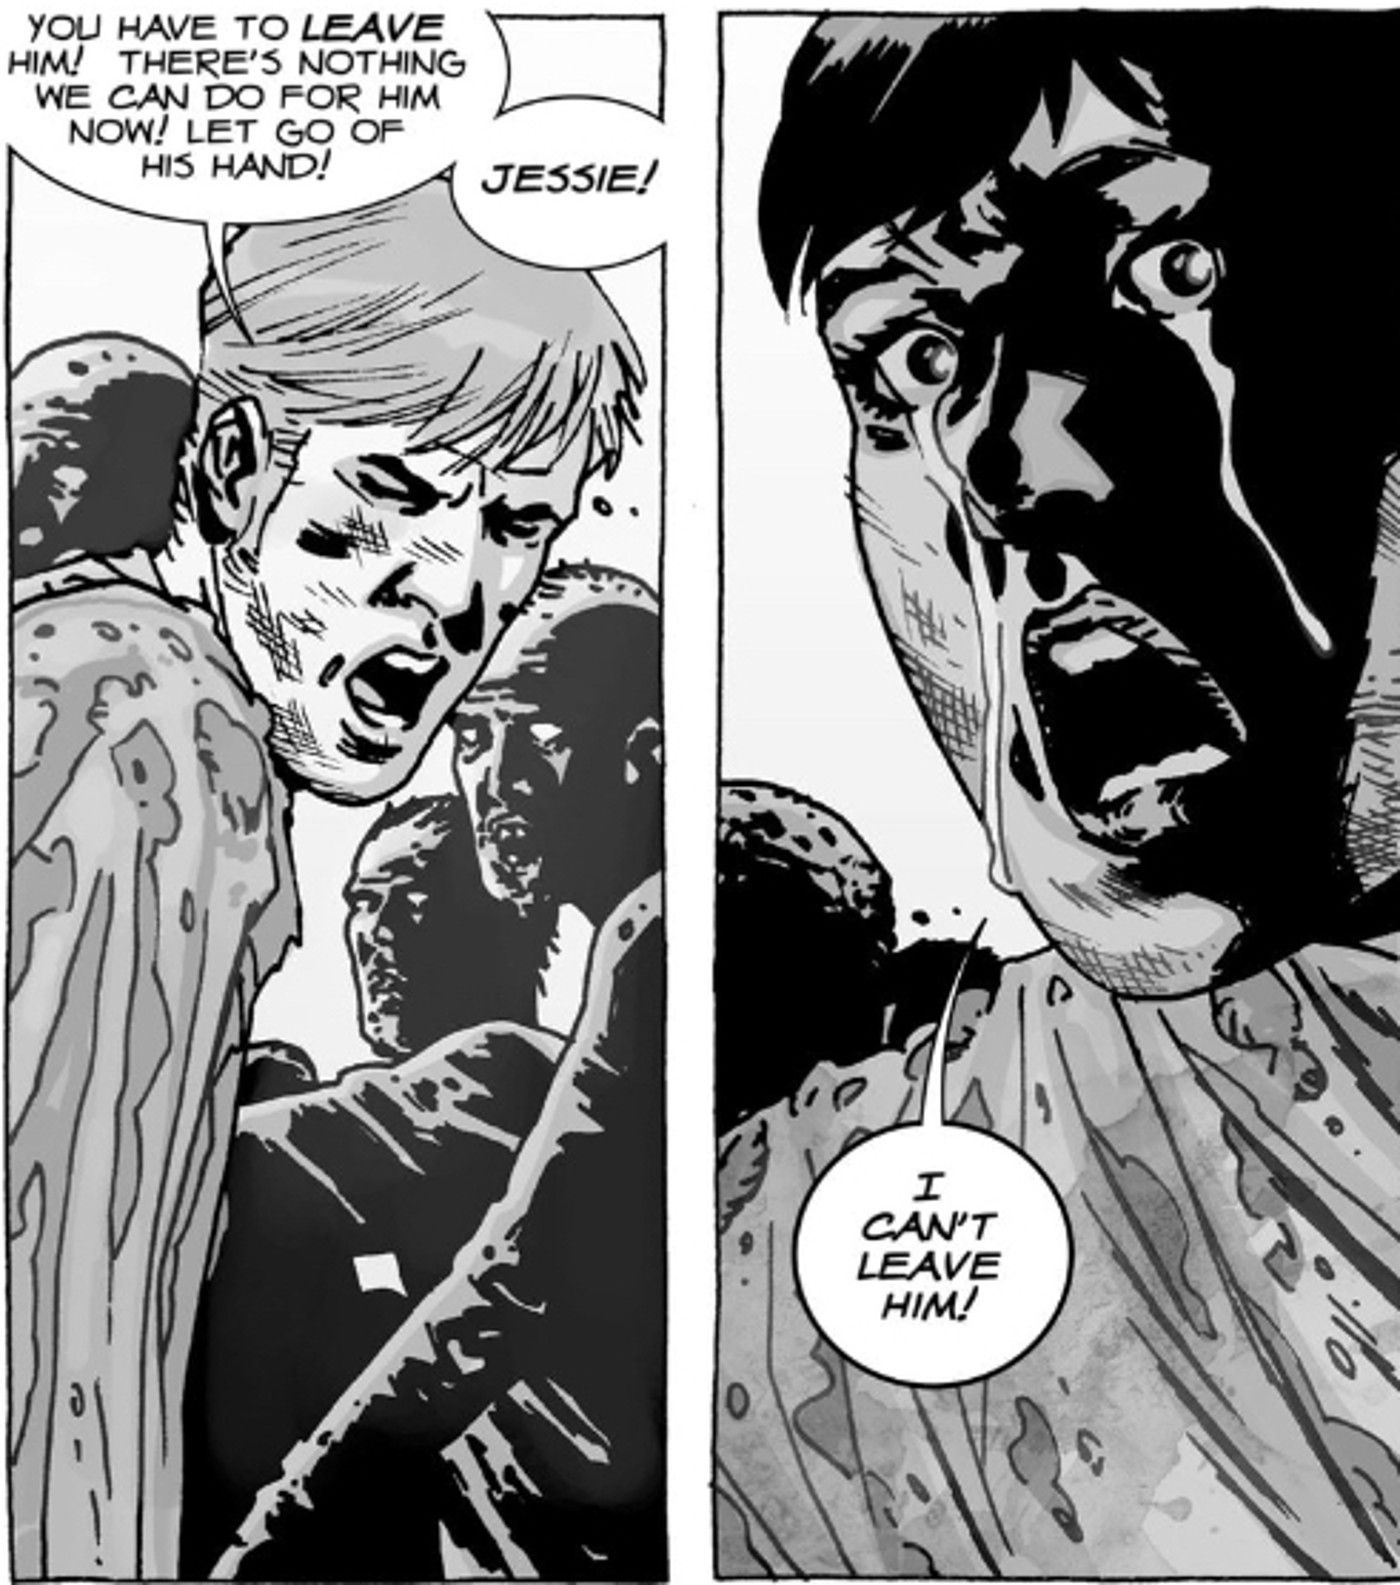 Walking Dead #83, Rick tells Jessie she has to leave her son Ron after the zombies get him